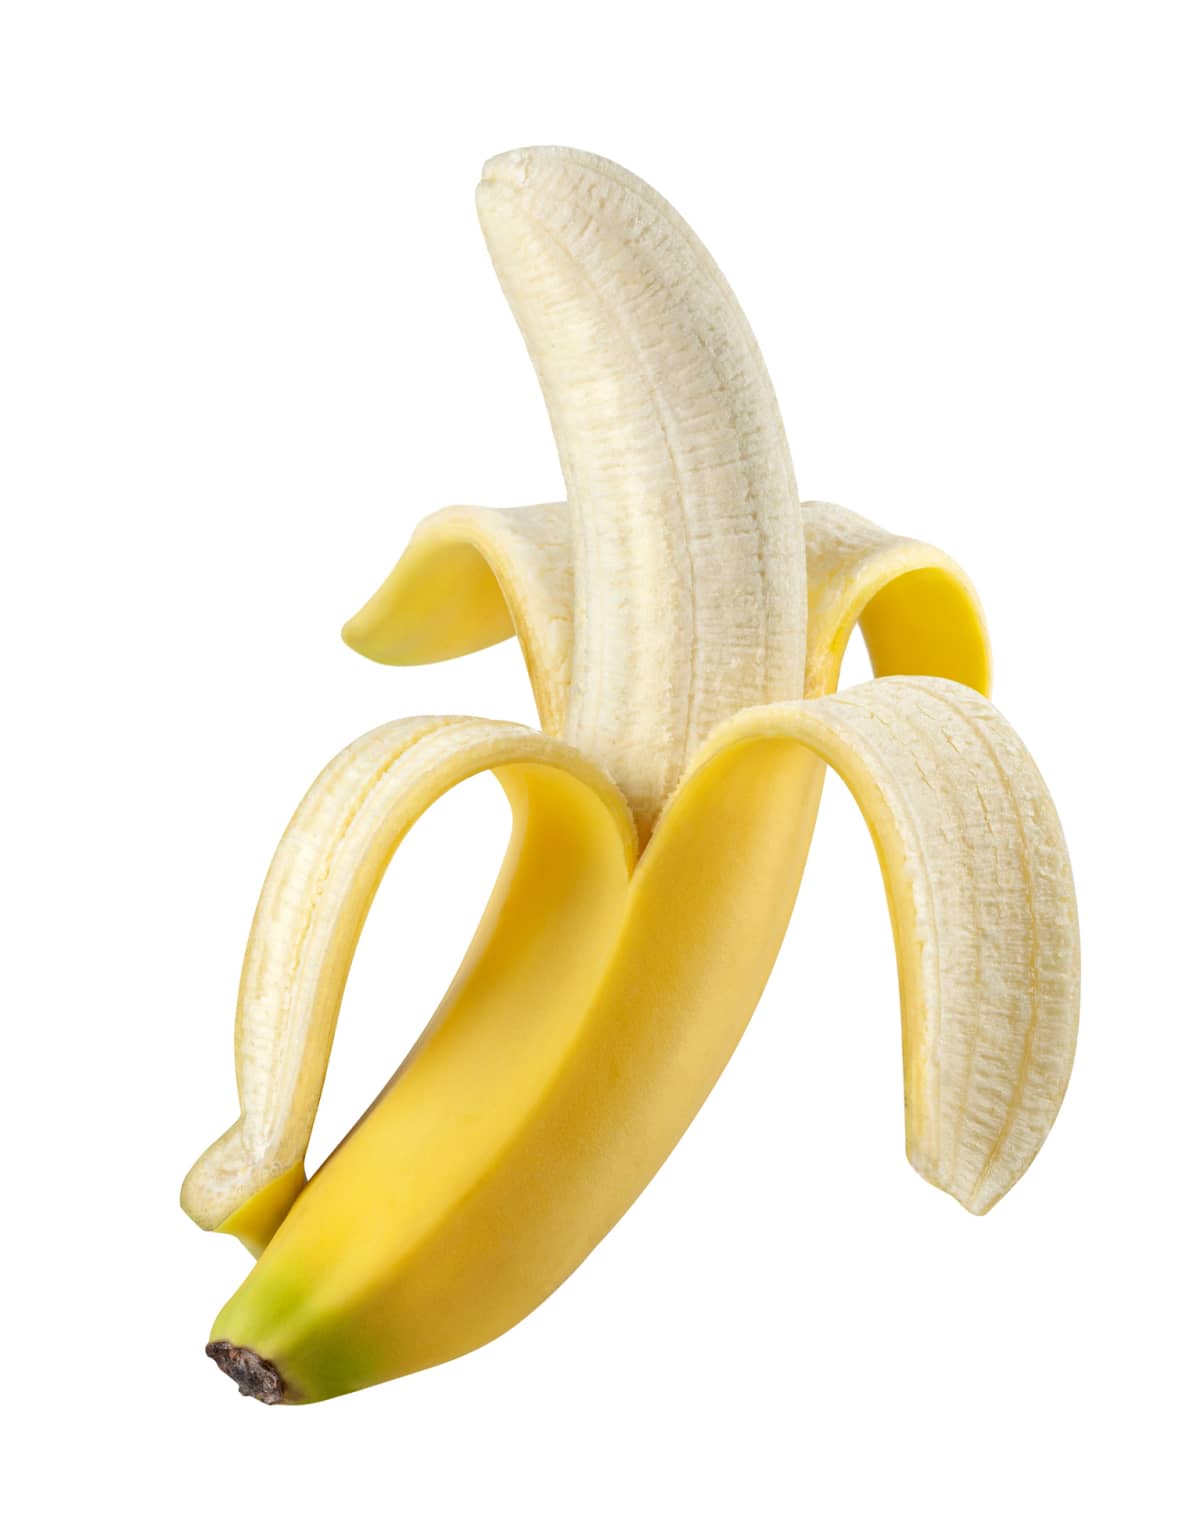 An opened banana on a white background